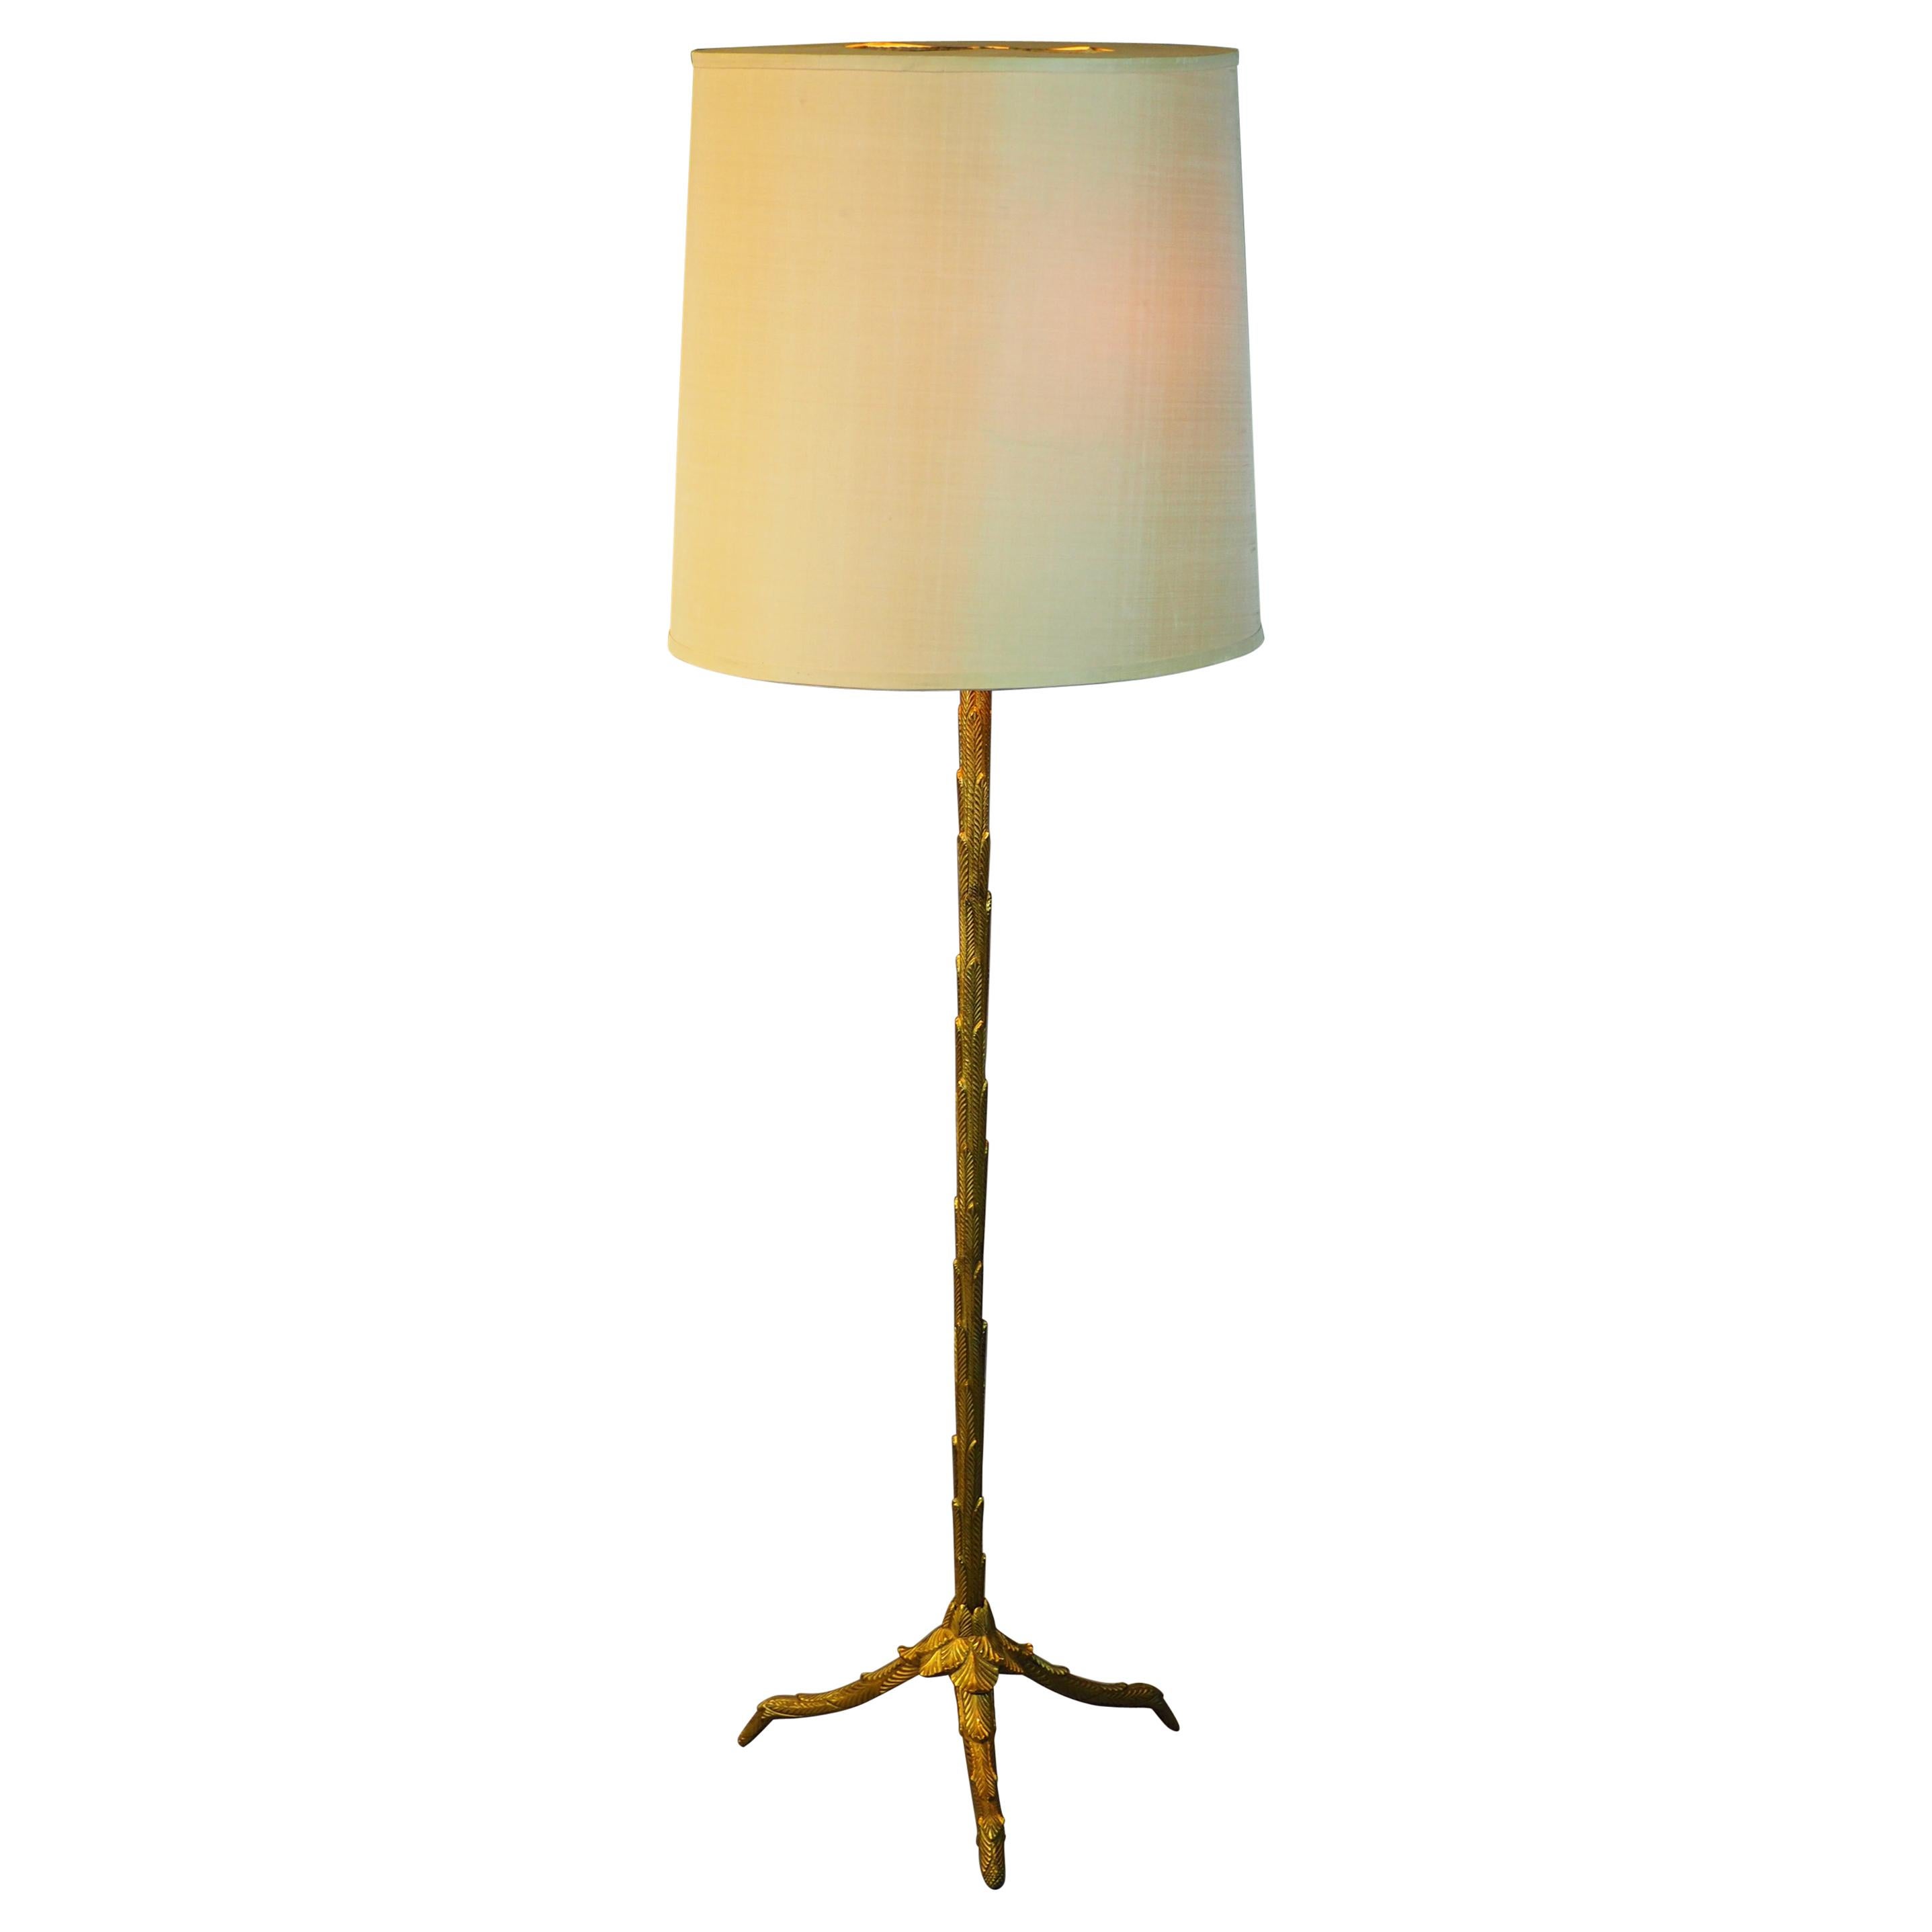 French Gilt Bronze Floor Lamp by Maison Baguès, circa 1950s For Sale